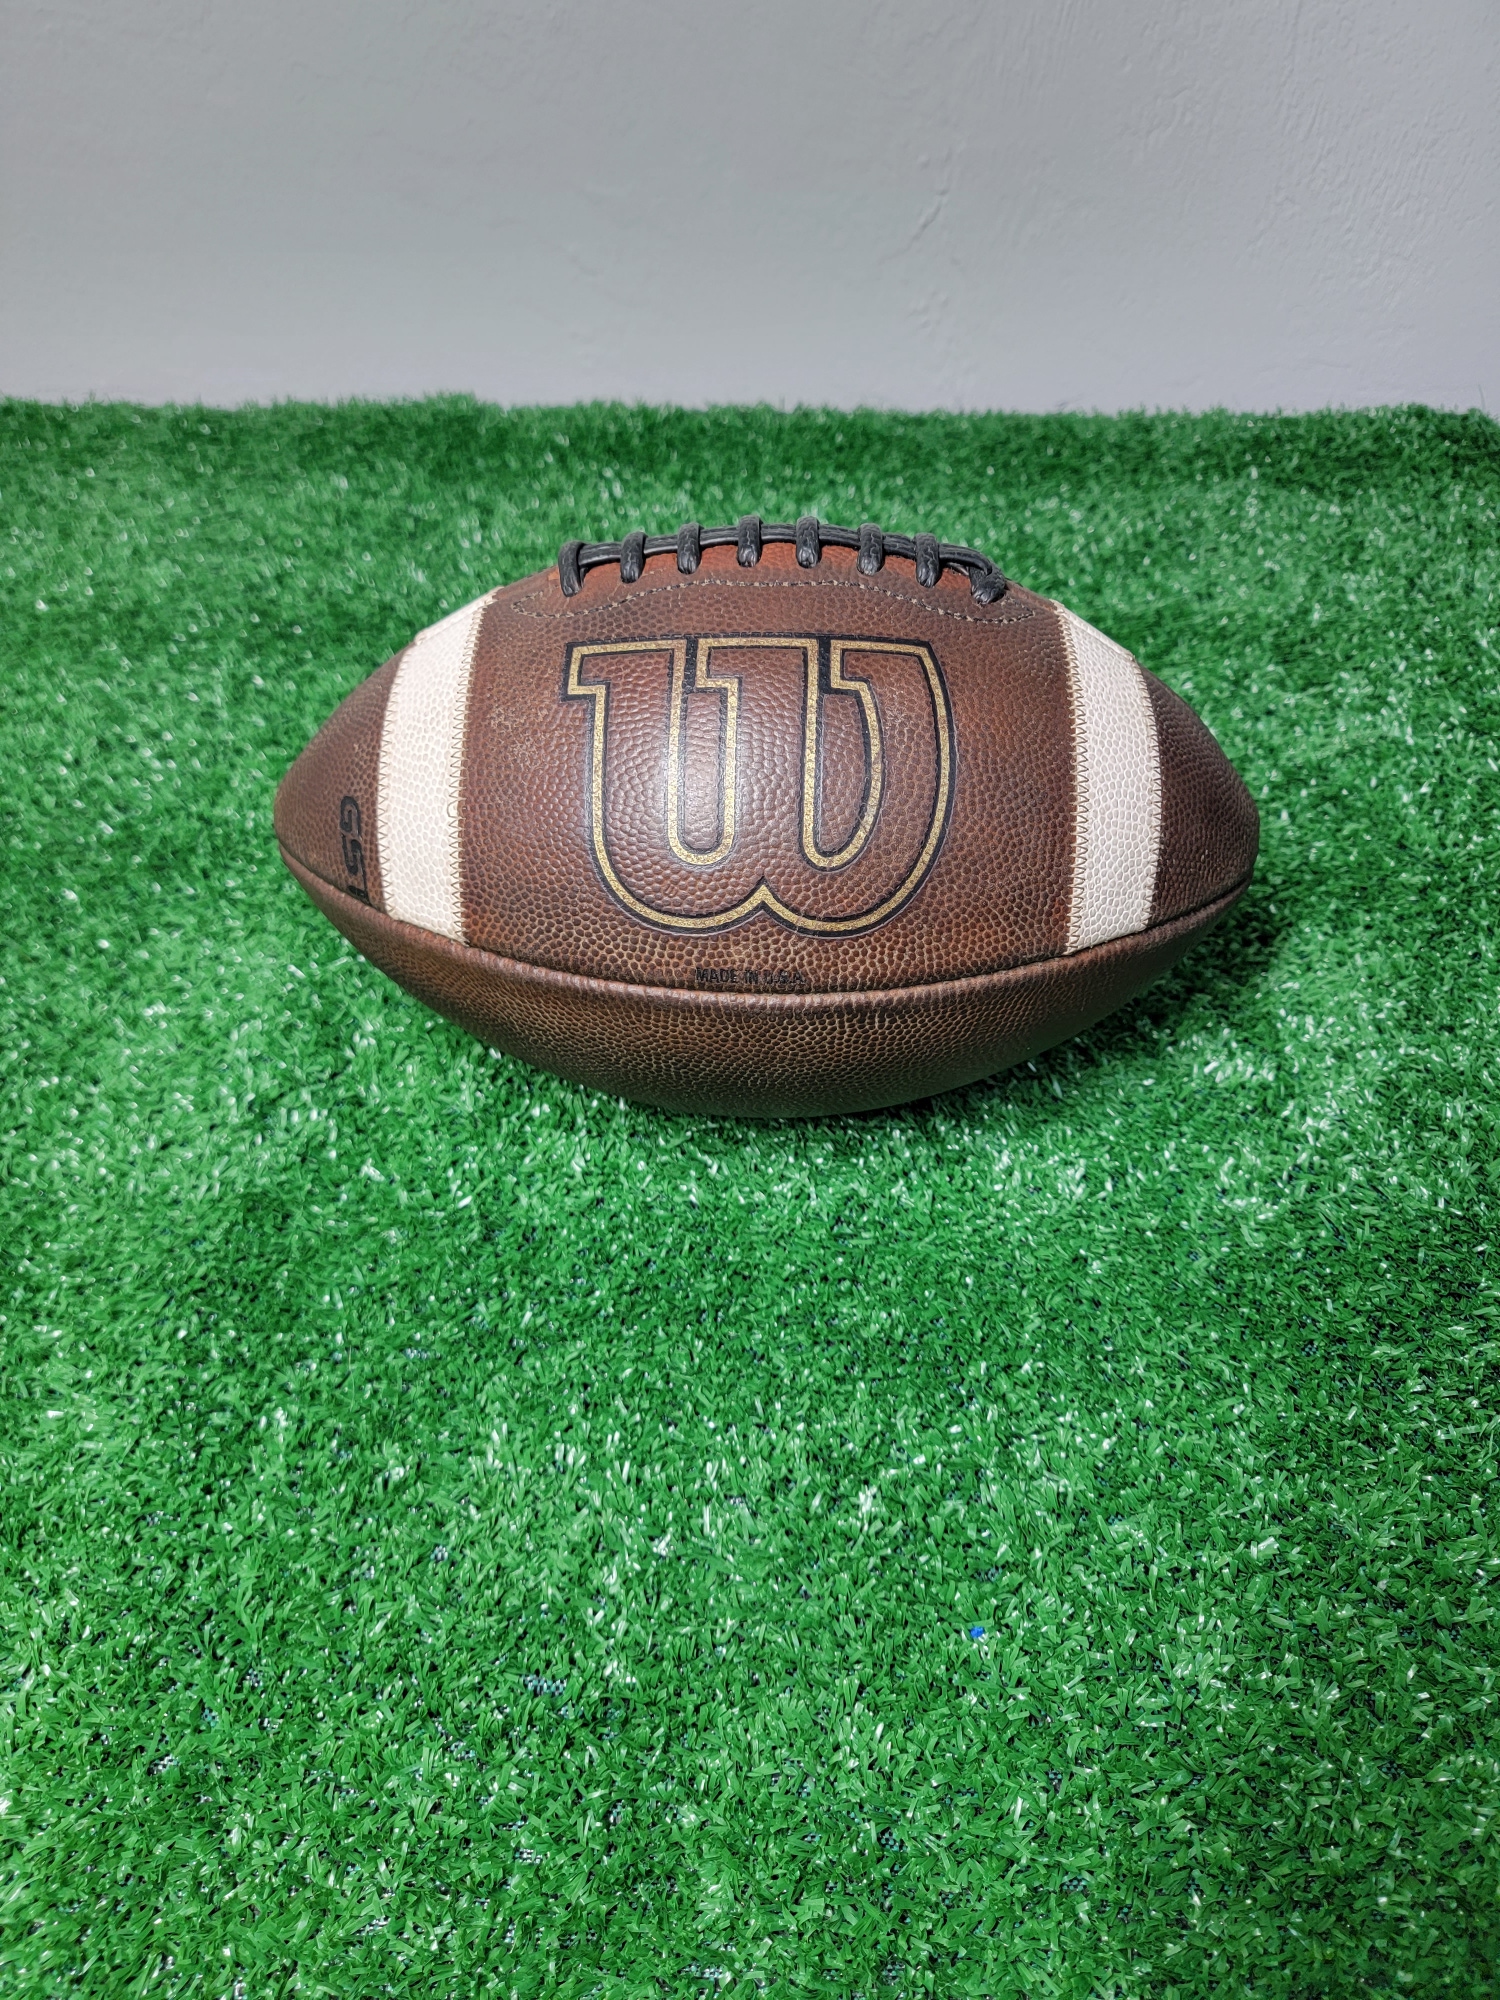 Mudded & Prepped Leather Wilson GST Football